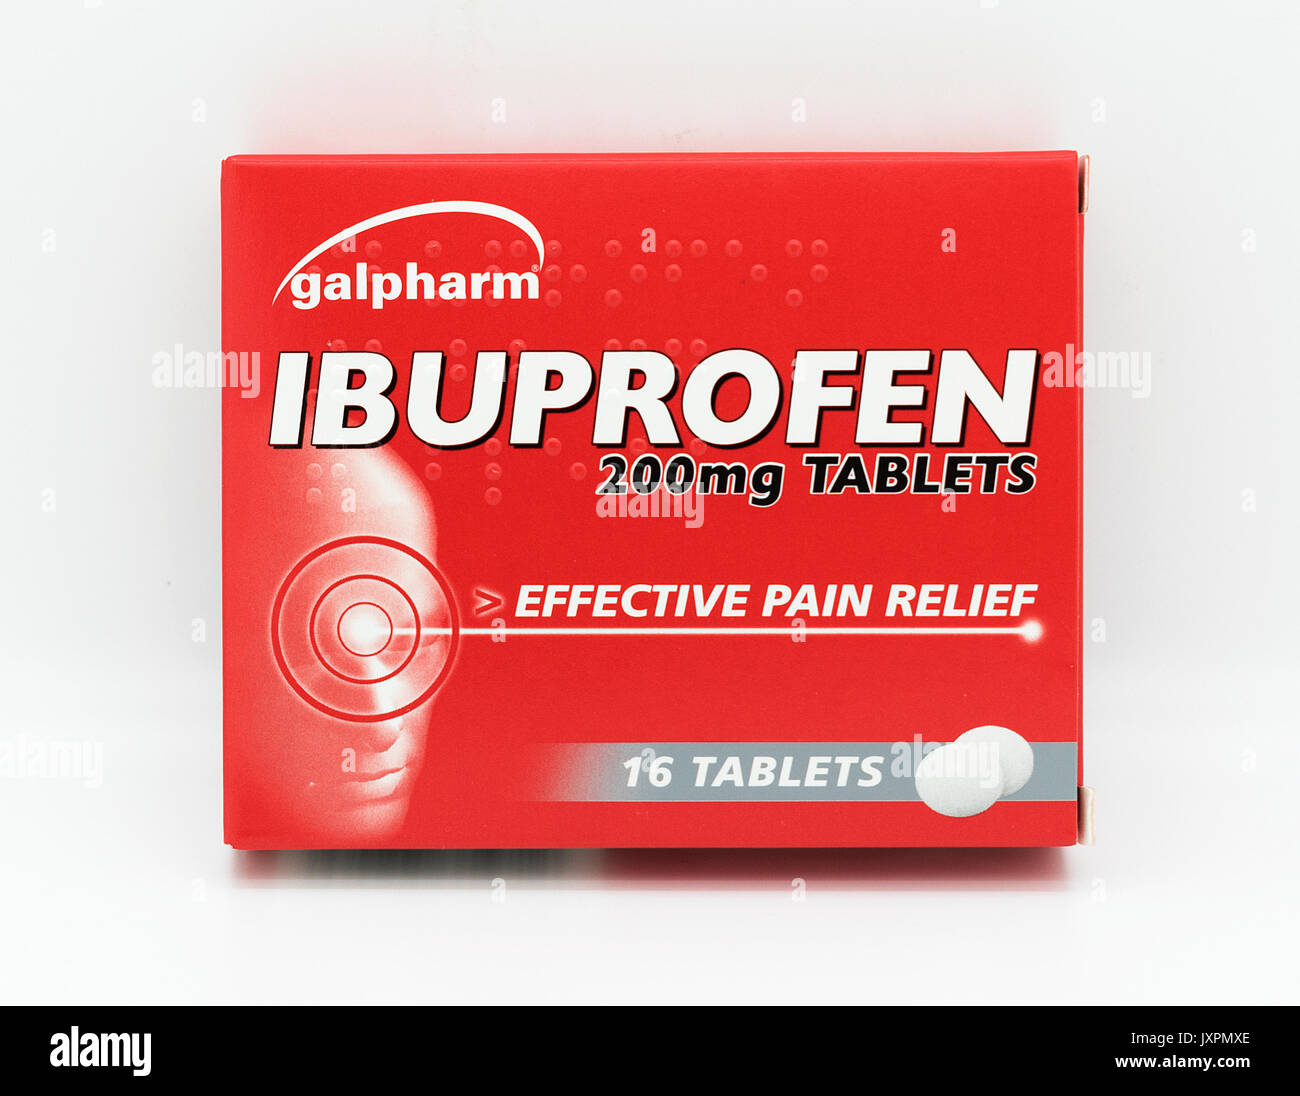 galpharm ibuprofen tablets, pain killers, pain relief. Stock Photo